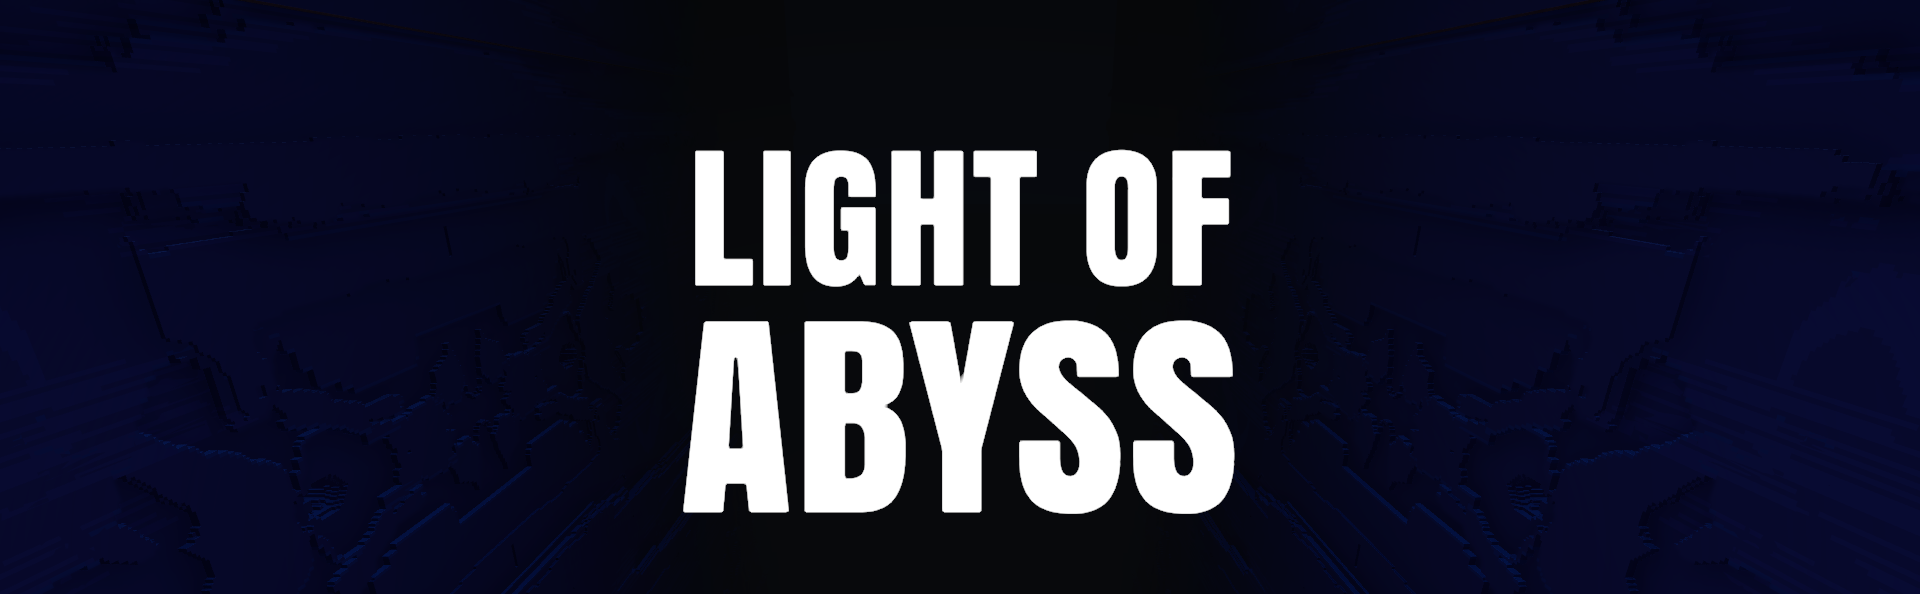 Light of Abyss